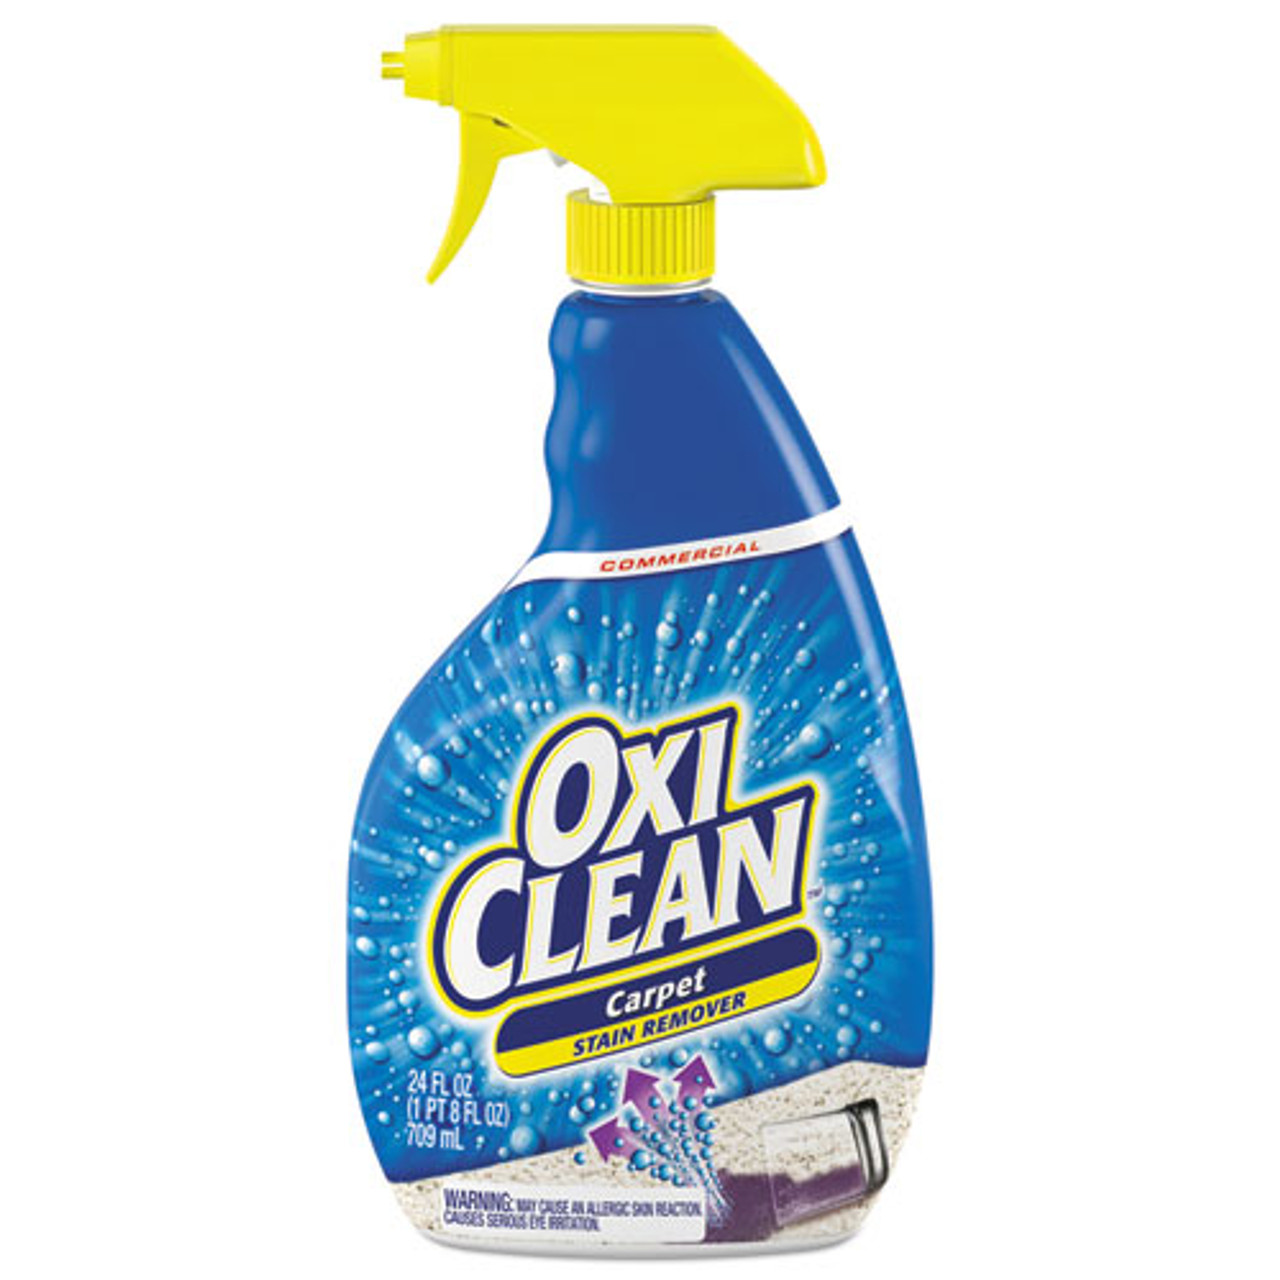 Carpet Stain Removers in Carpet Cleaning Solution 